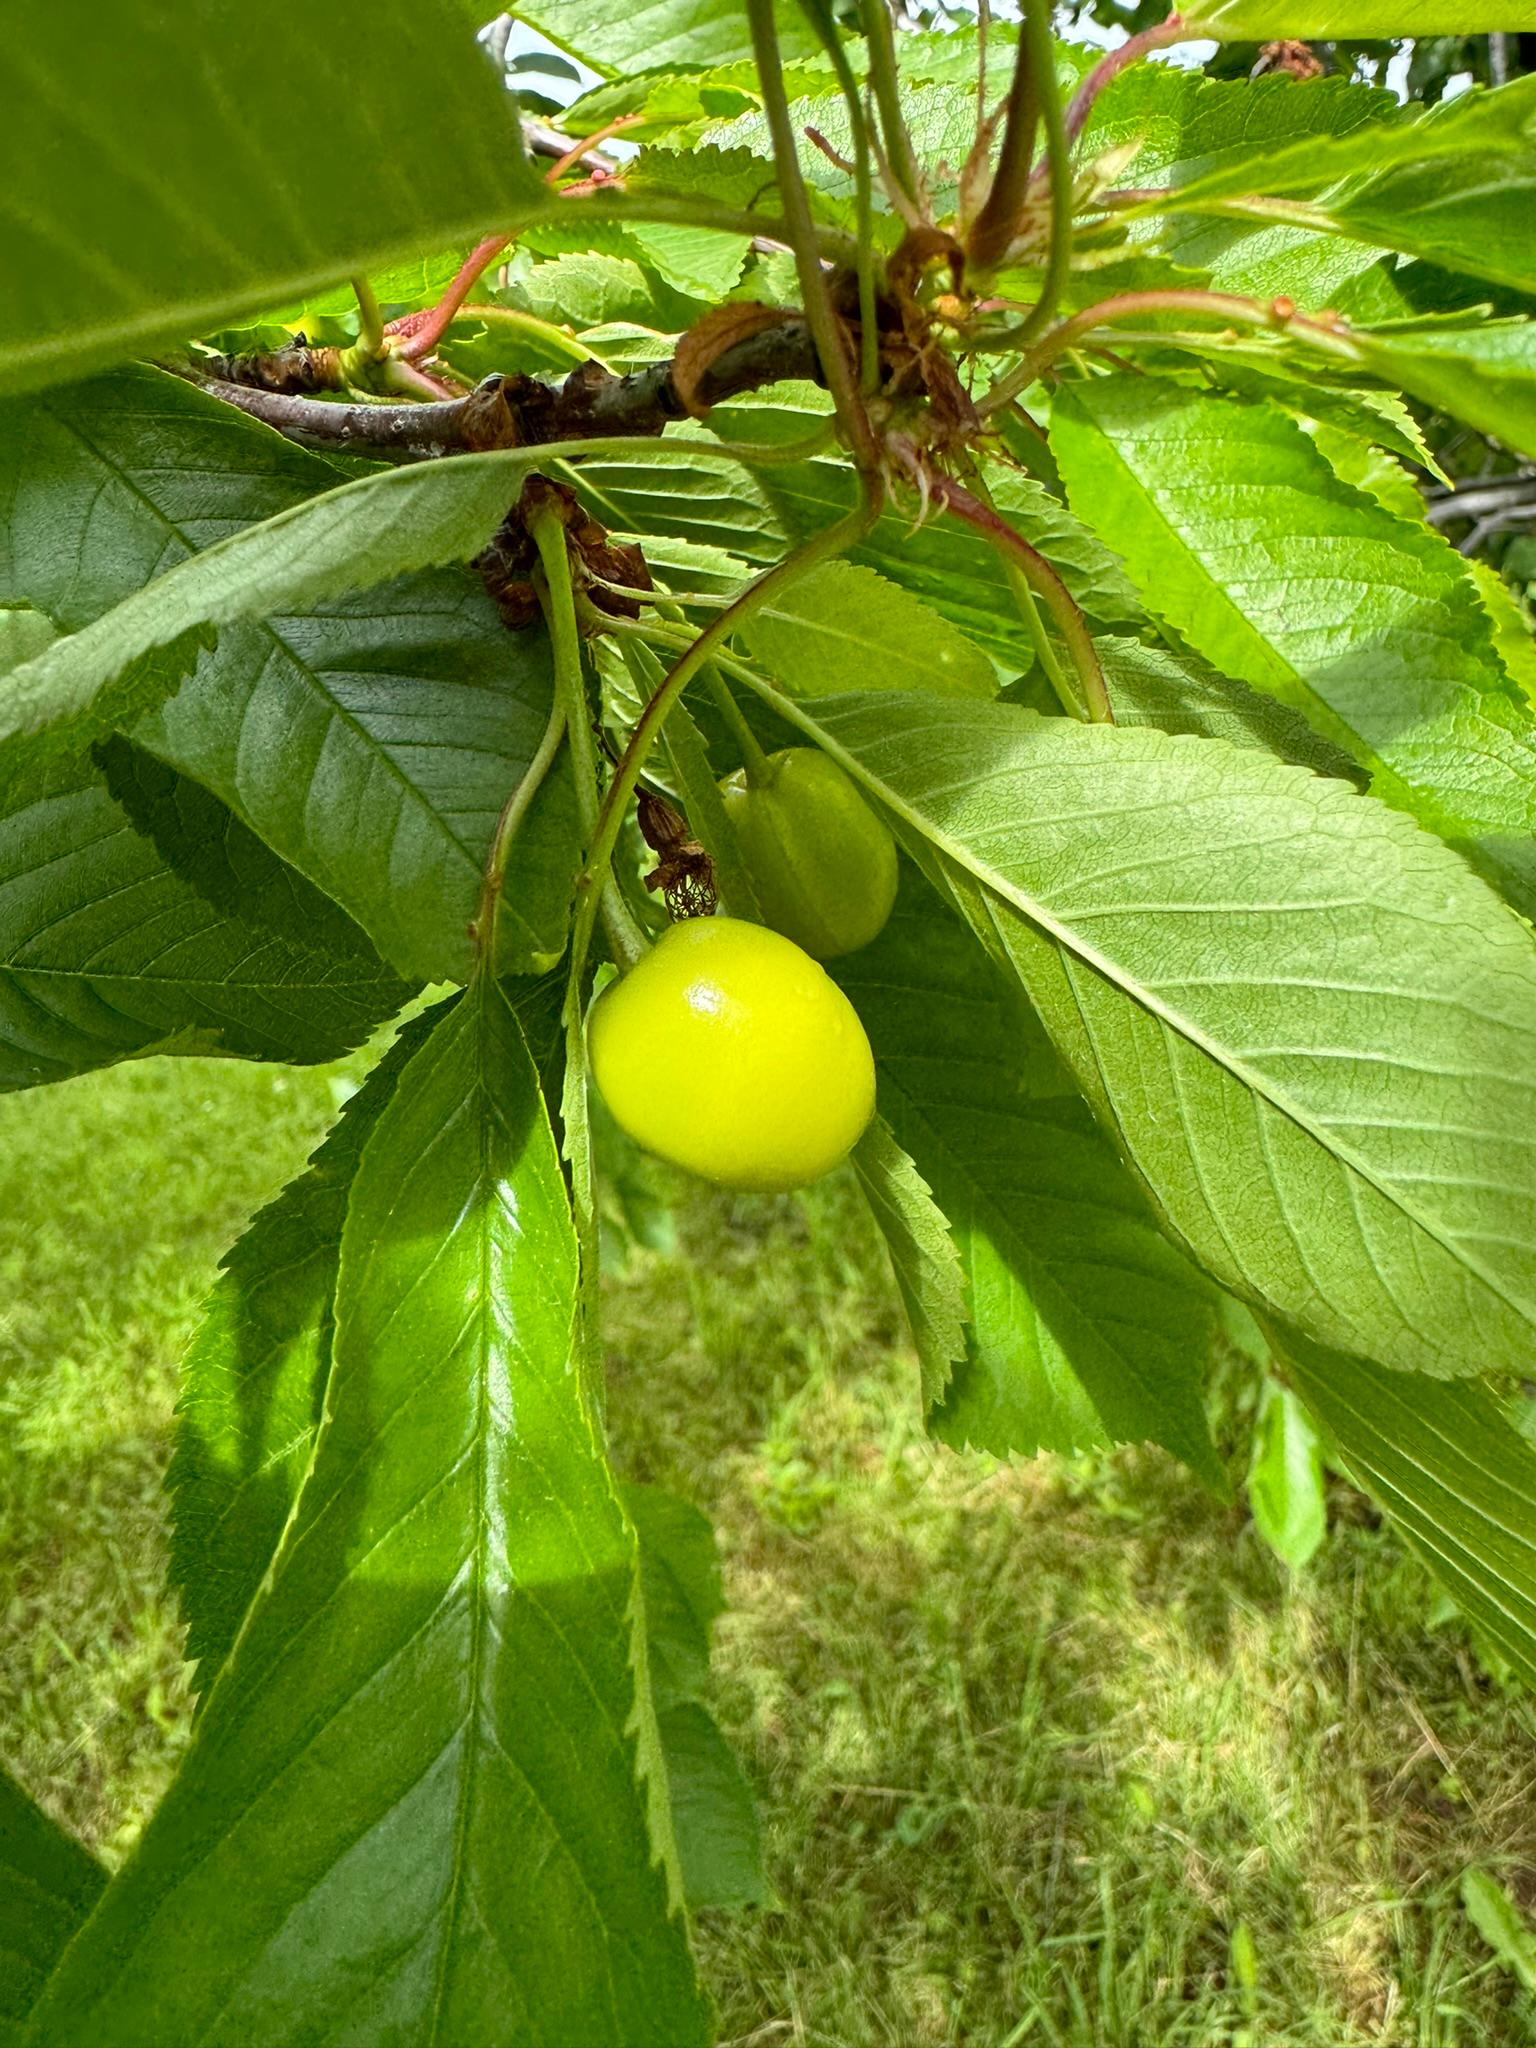 A plum hanging from a tree.